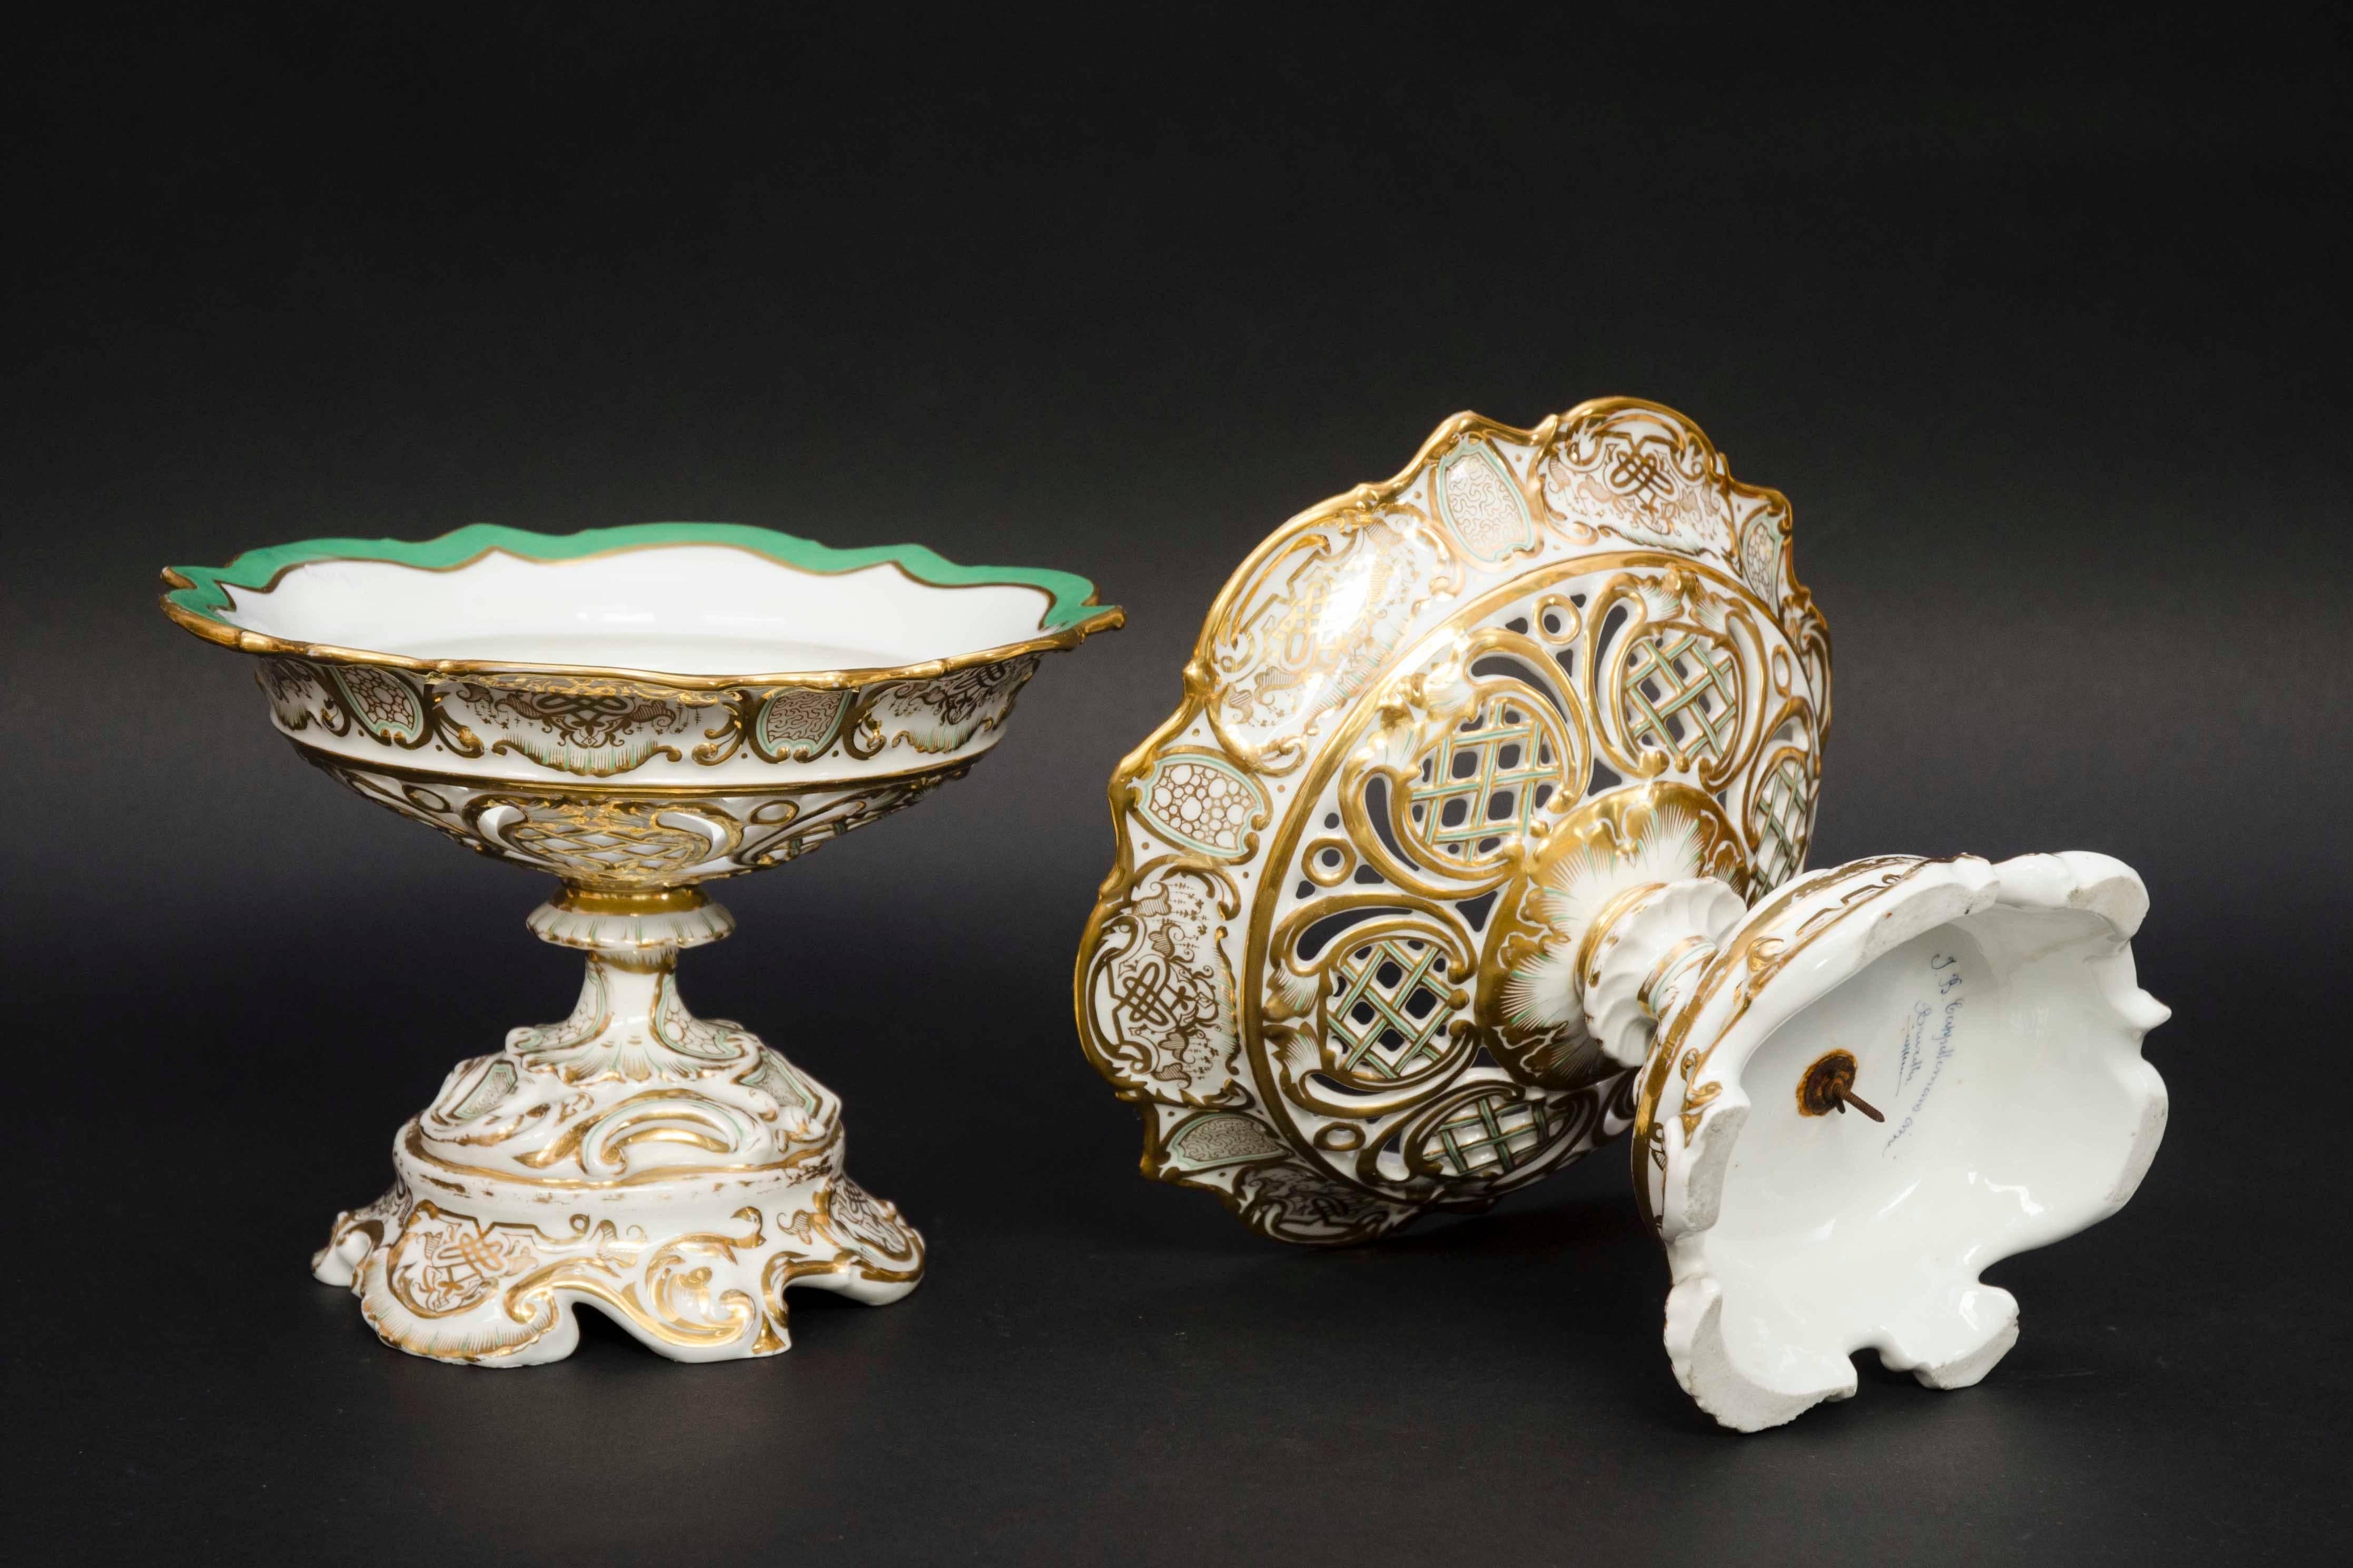 19th Century Rococo Garniture with Three Porcelain Baskets Signed Cappellemans For Sale 3